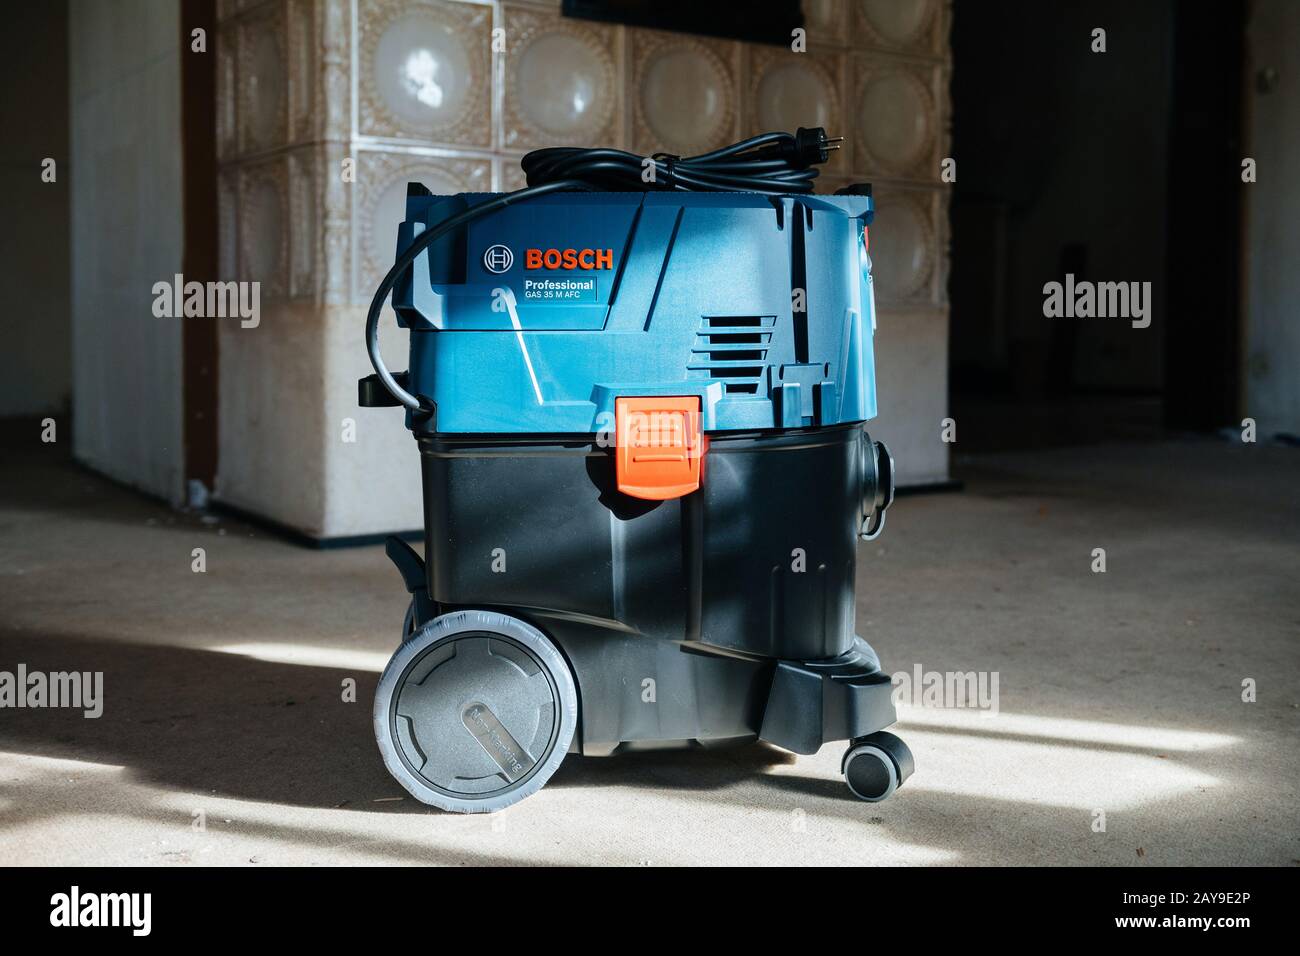 Strasbourg, France - Feb 9, 2020: New Bosch Professional Gas 35 M Class AFC  with automatic filter cleaning system extractor with Kachelofen in  background Stock Photo - Alamy